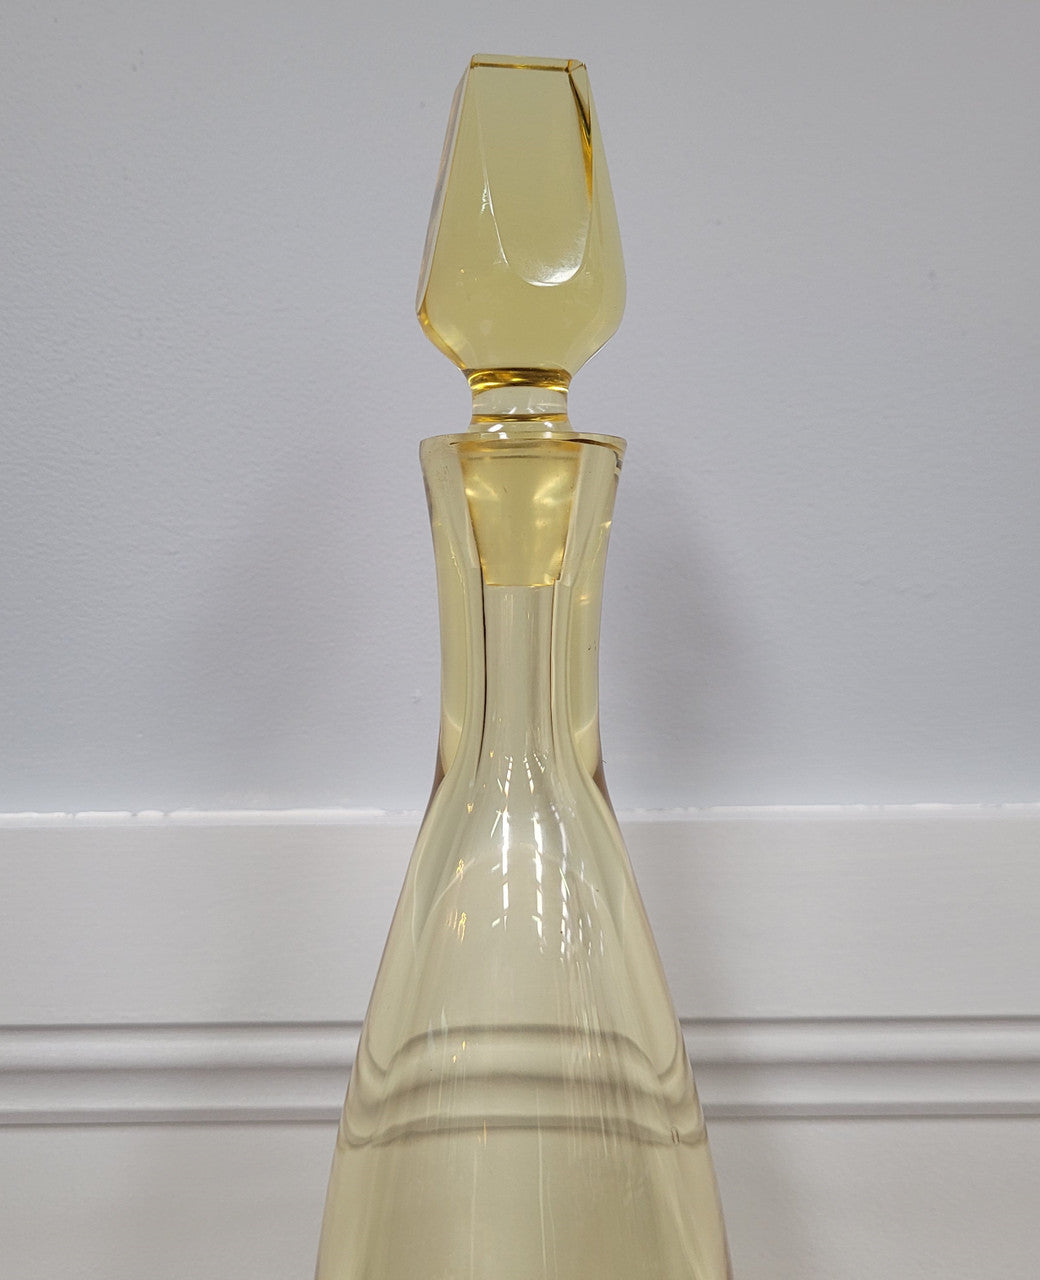 Bohemian yellow cut glass decanter. Please view photos as they help form part of the description.